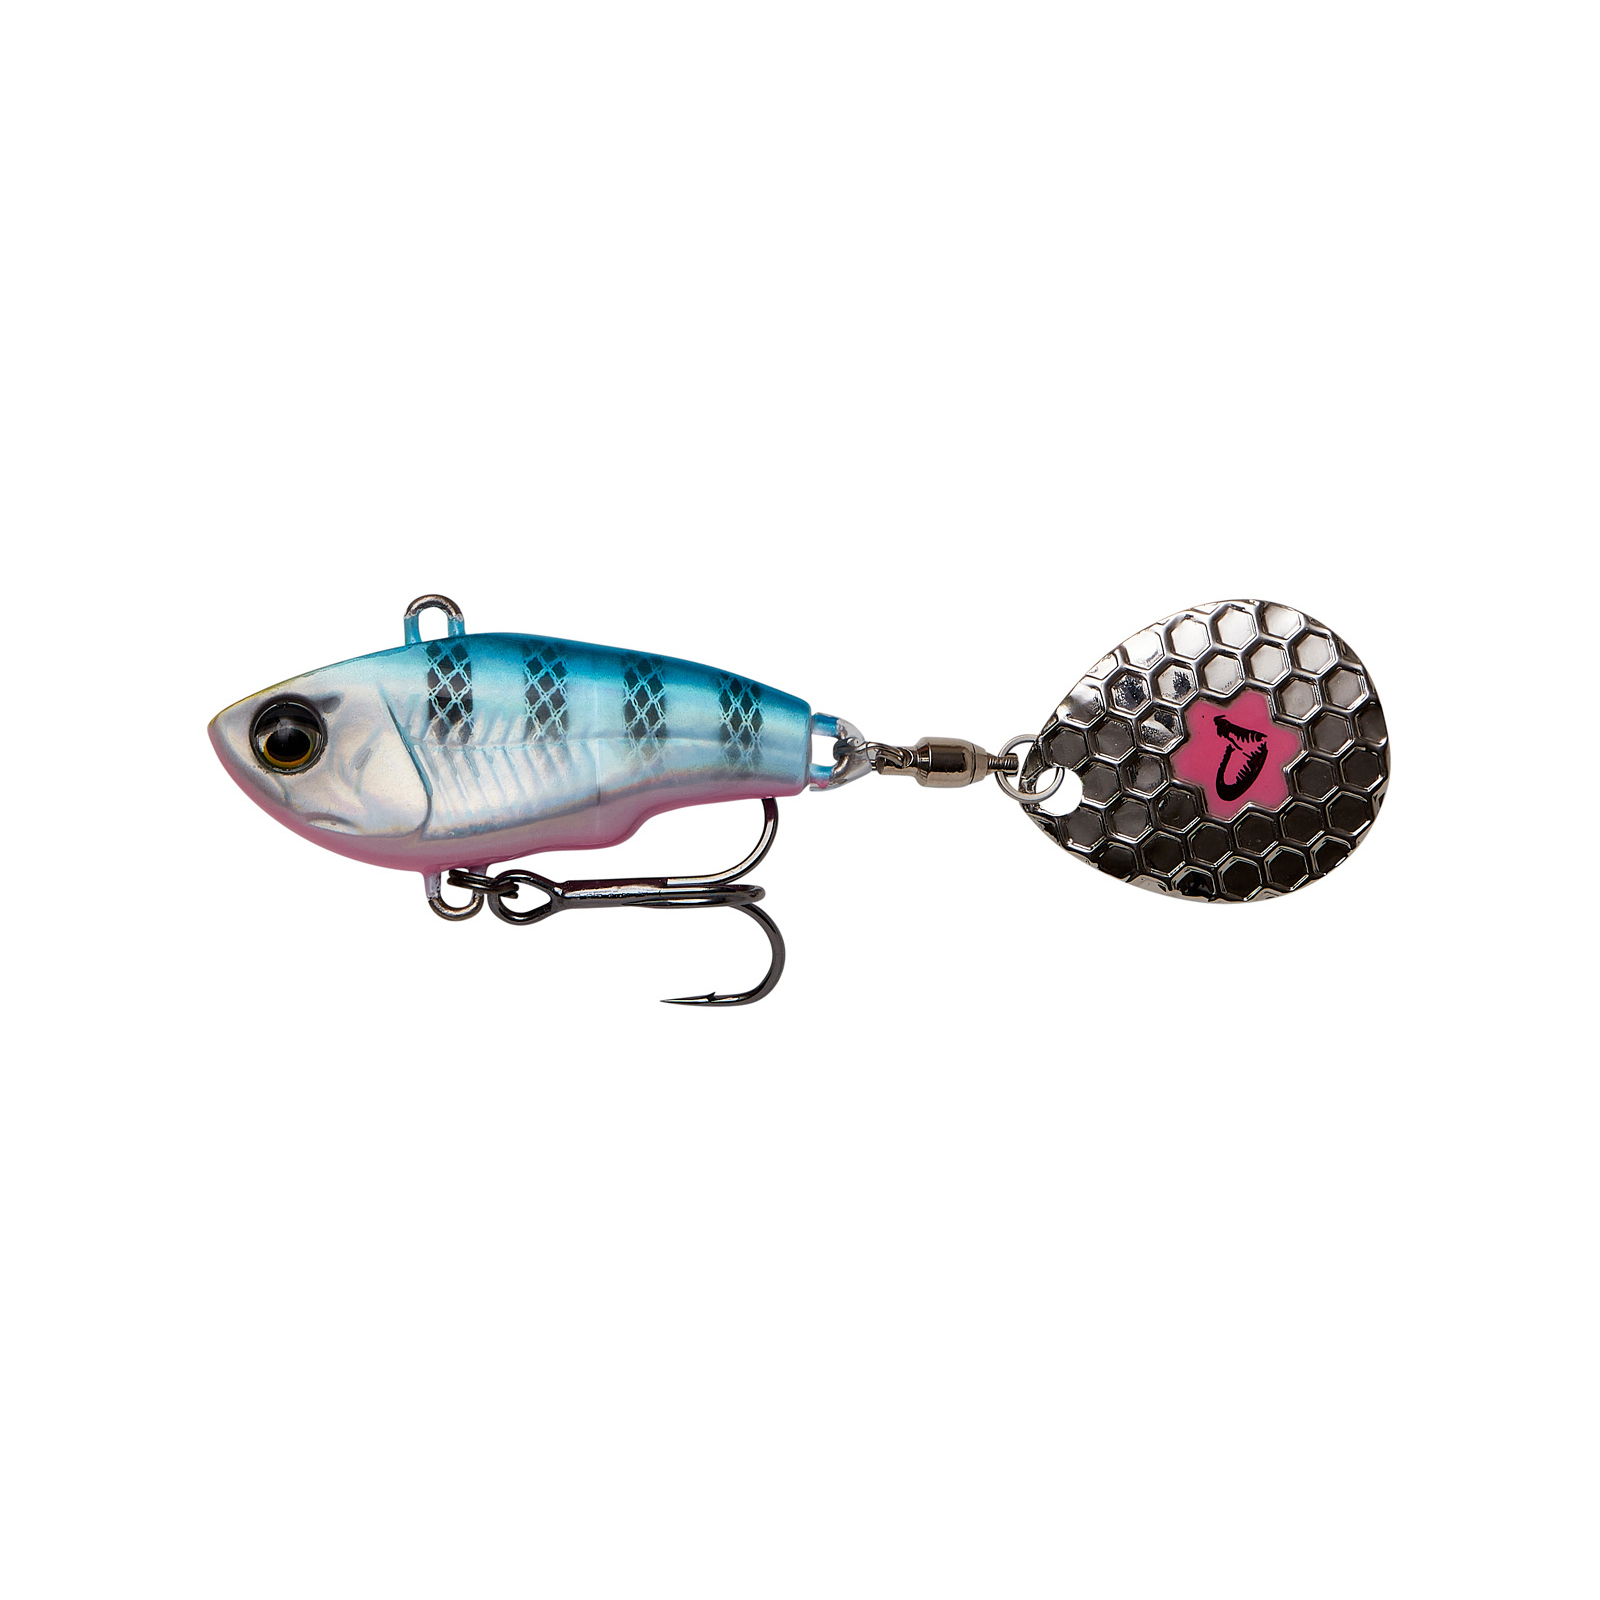 Блесна Savage Gear Fat Tail Spin 65mm 16.0g Blue Silver Pink (1854.11.74)